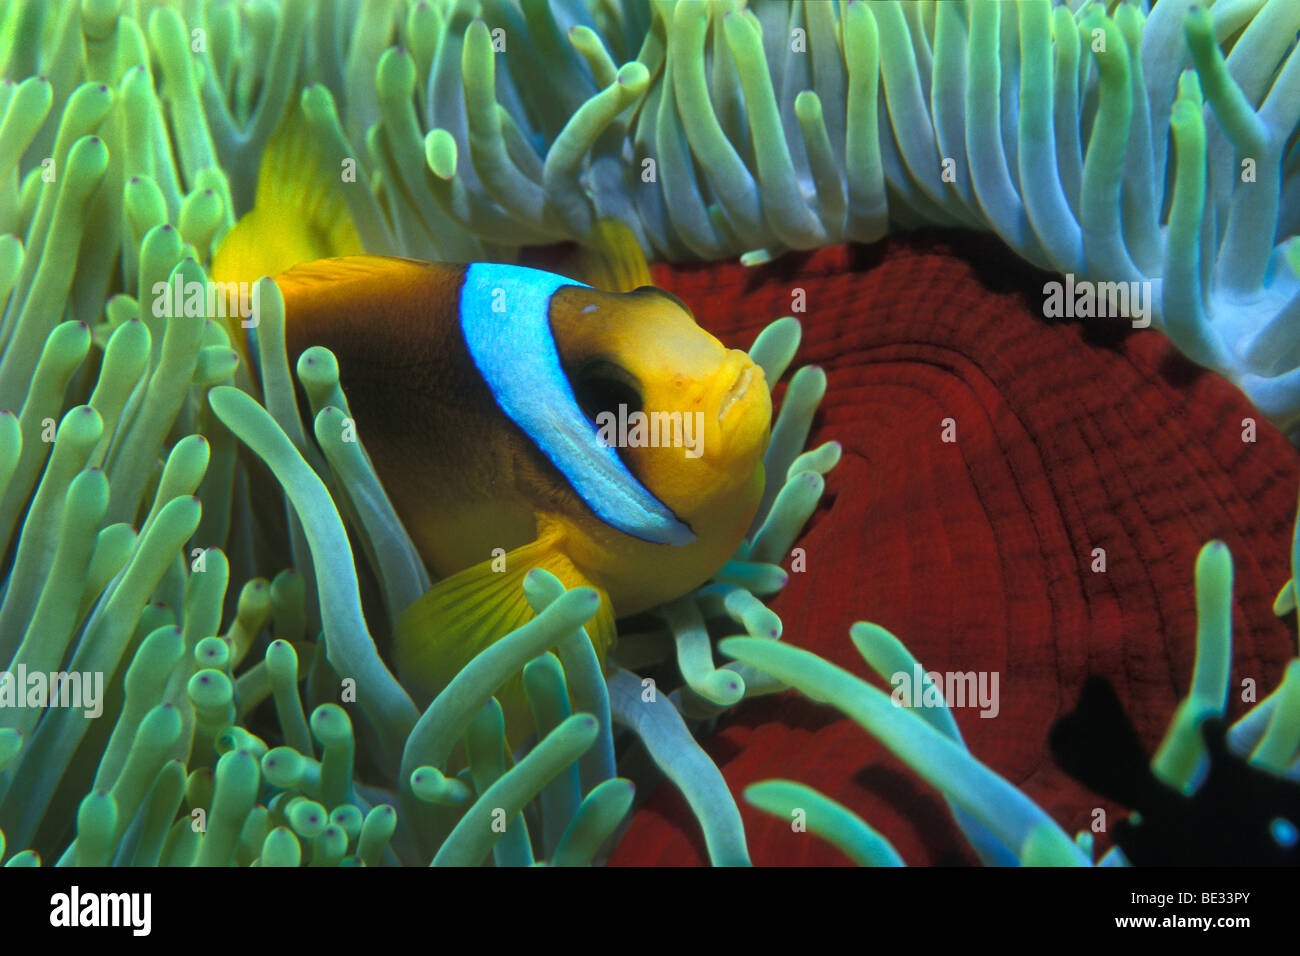 Two-banded Anemonefish in Magnificent Anemone, Amphiprion bicinctus, Heteractis magnifica, Ras Mohammed, Sinai, Red Sea, Egypt Stock Photo